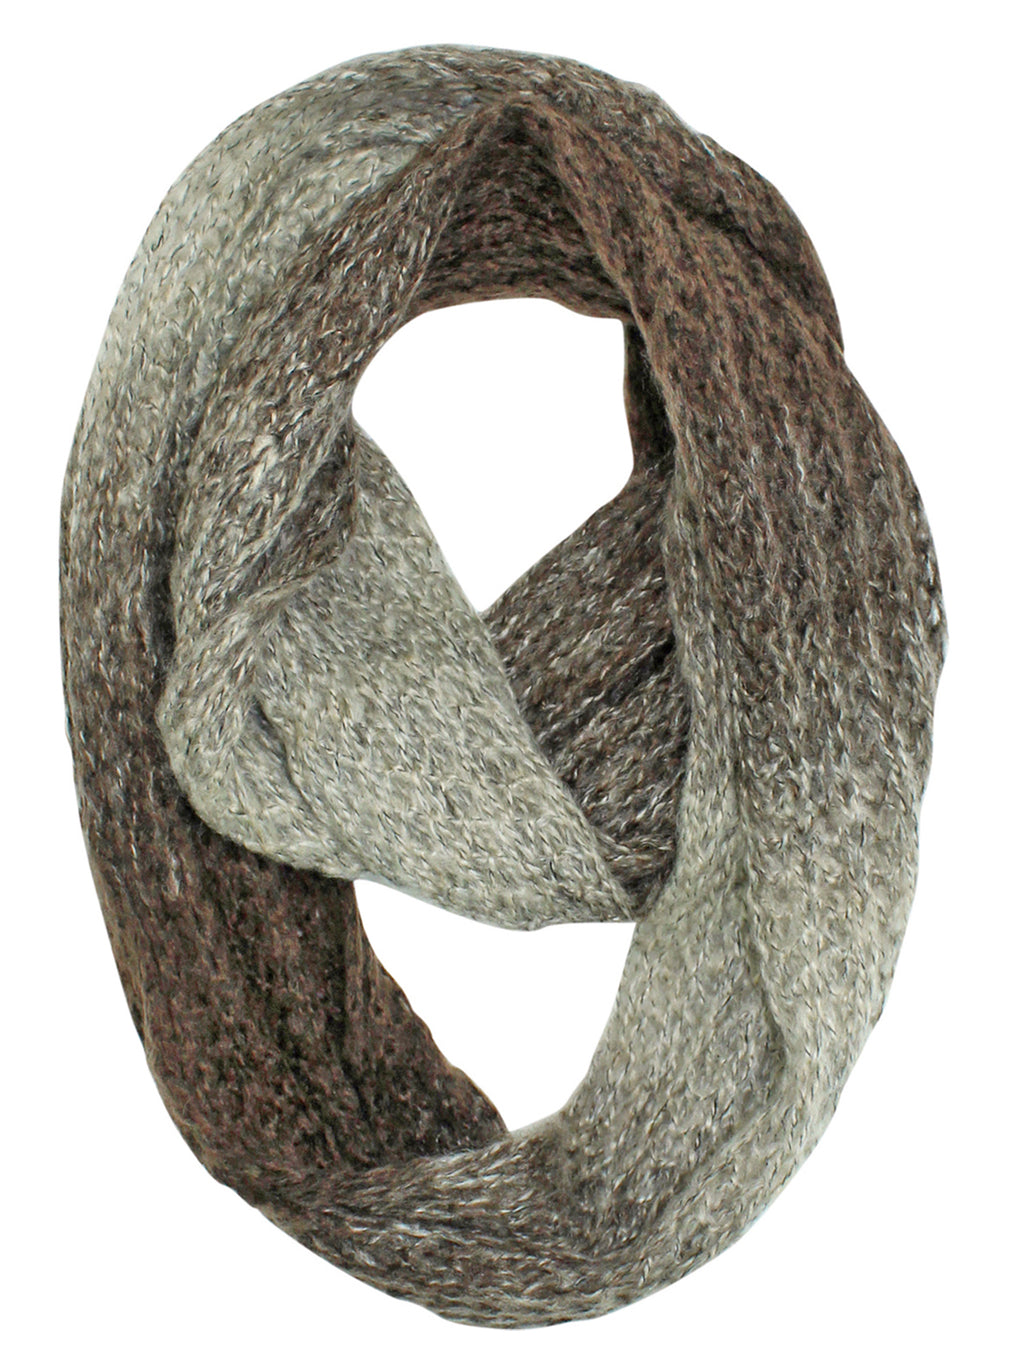 Gradient Ombre Winter Unisex Infinity Circle Scarf